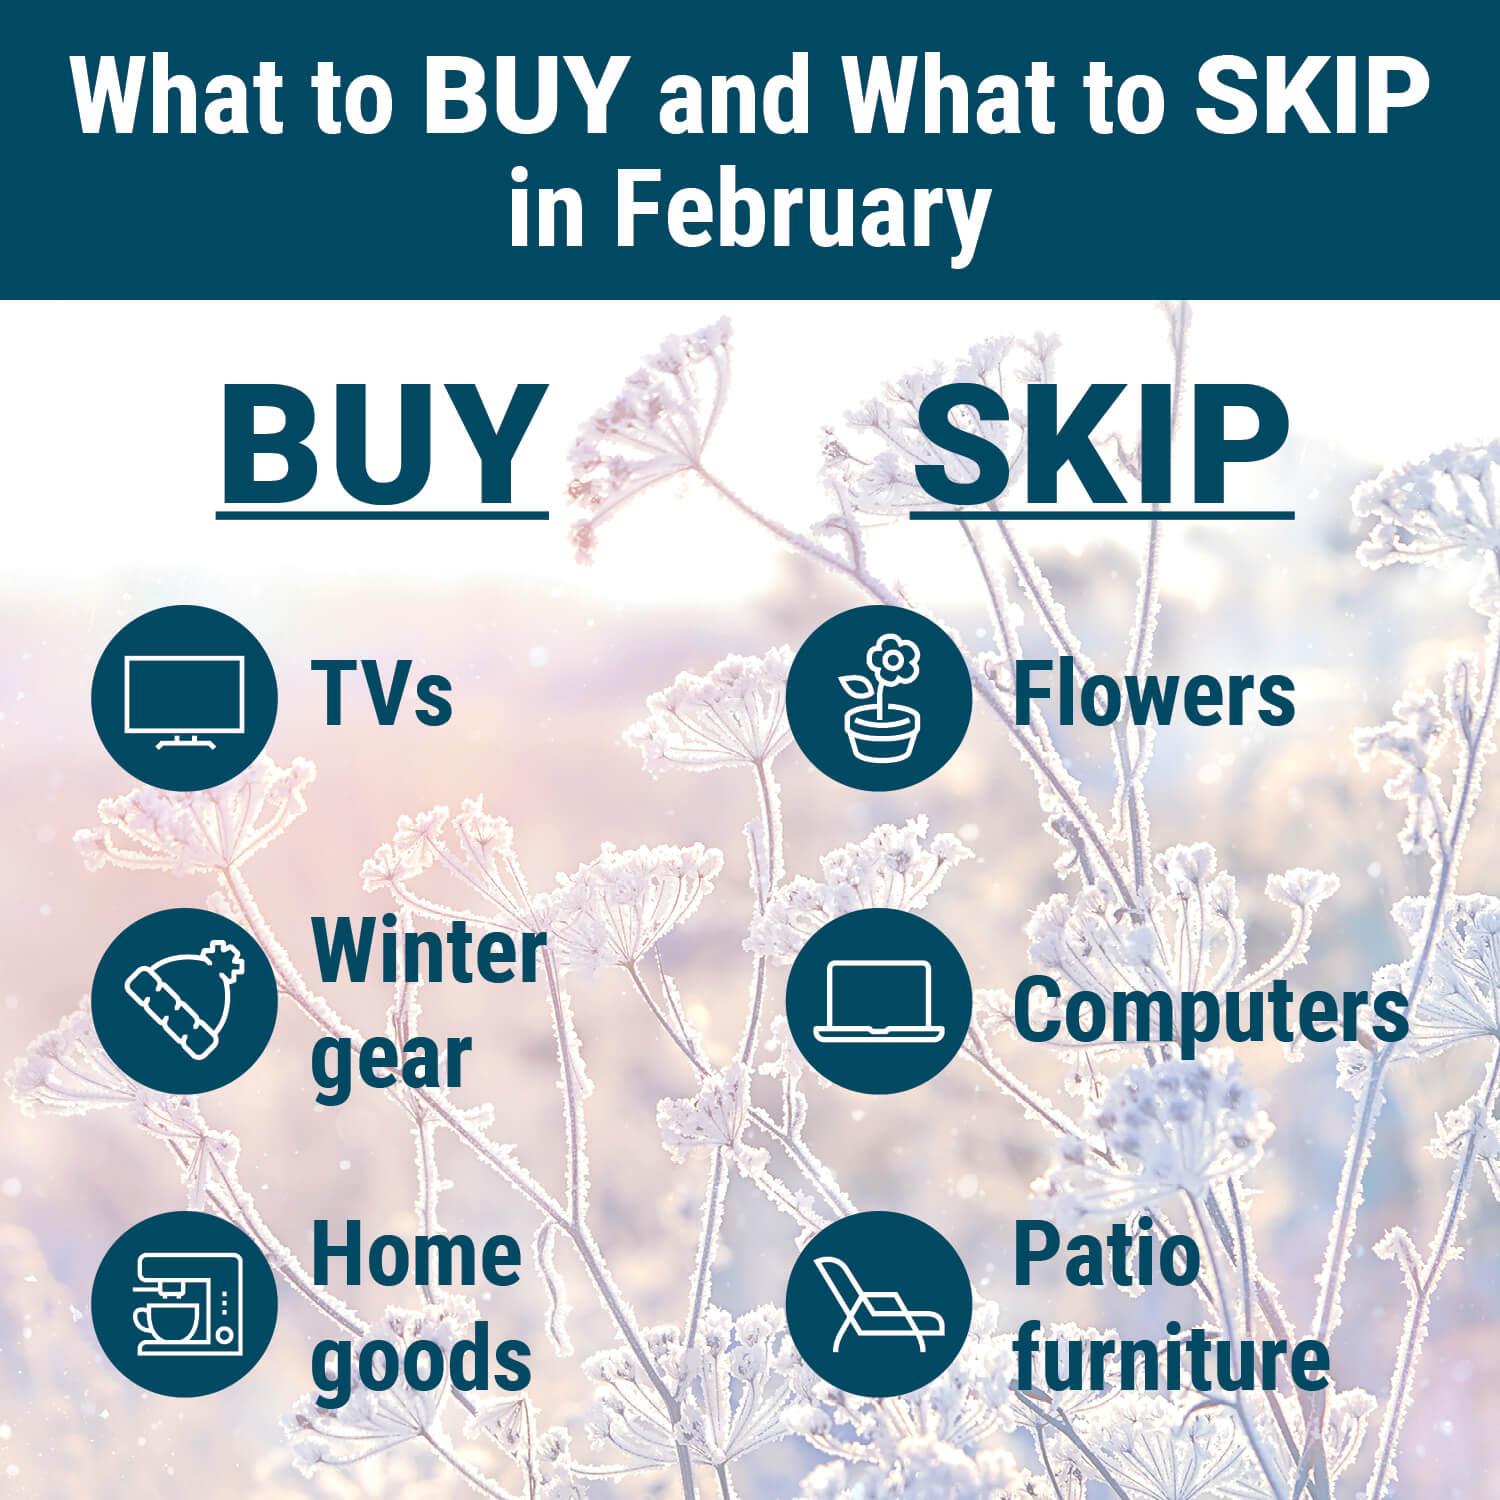 What to Buy and What to Skip in February